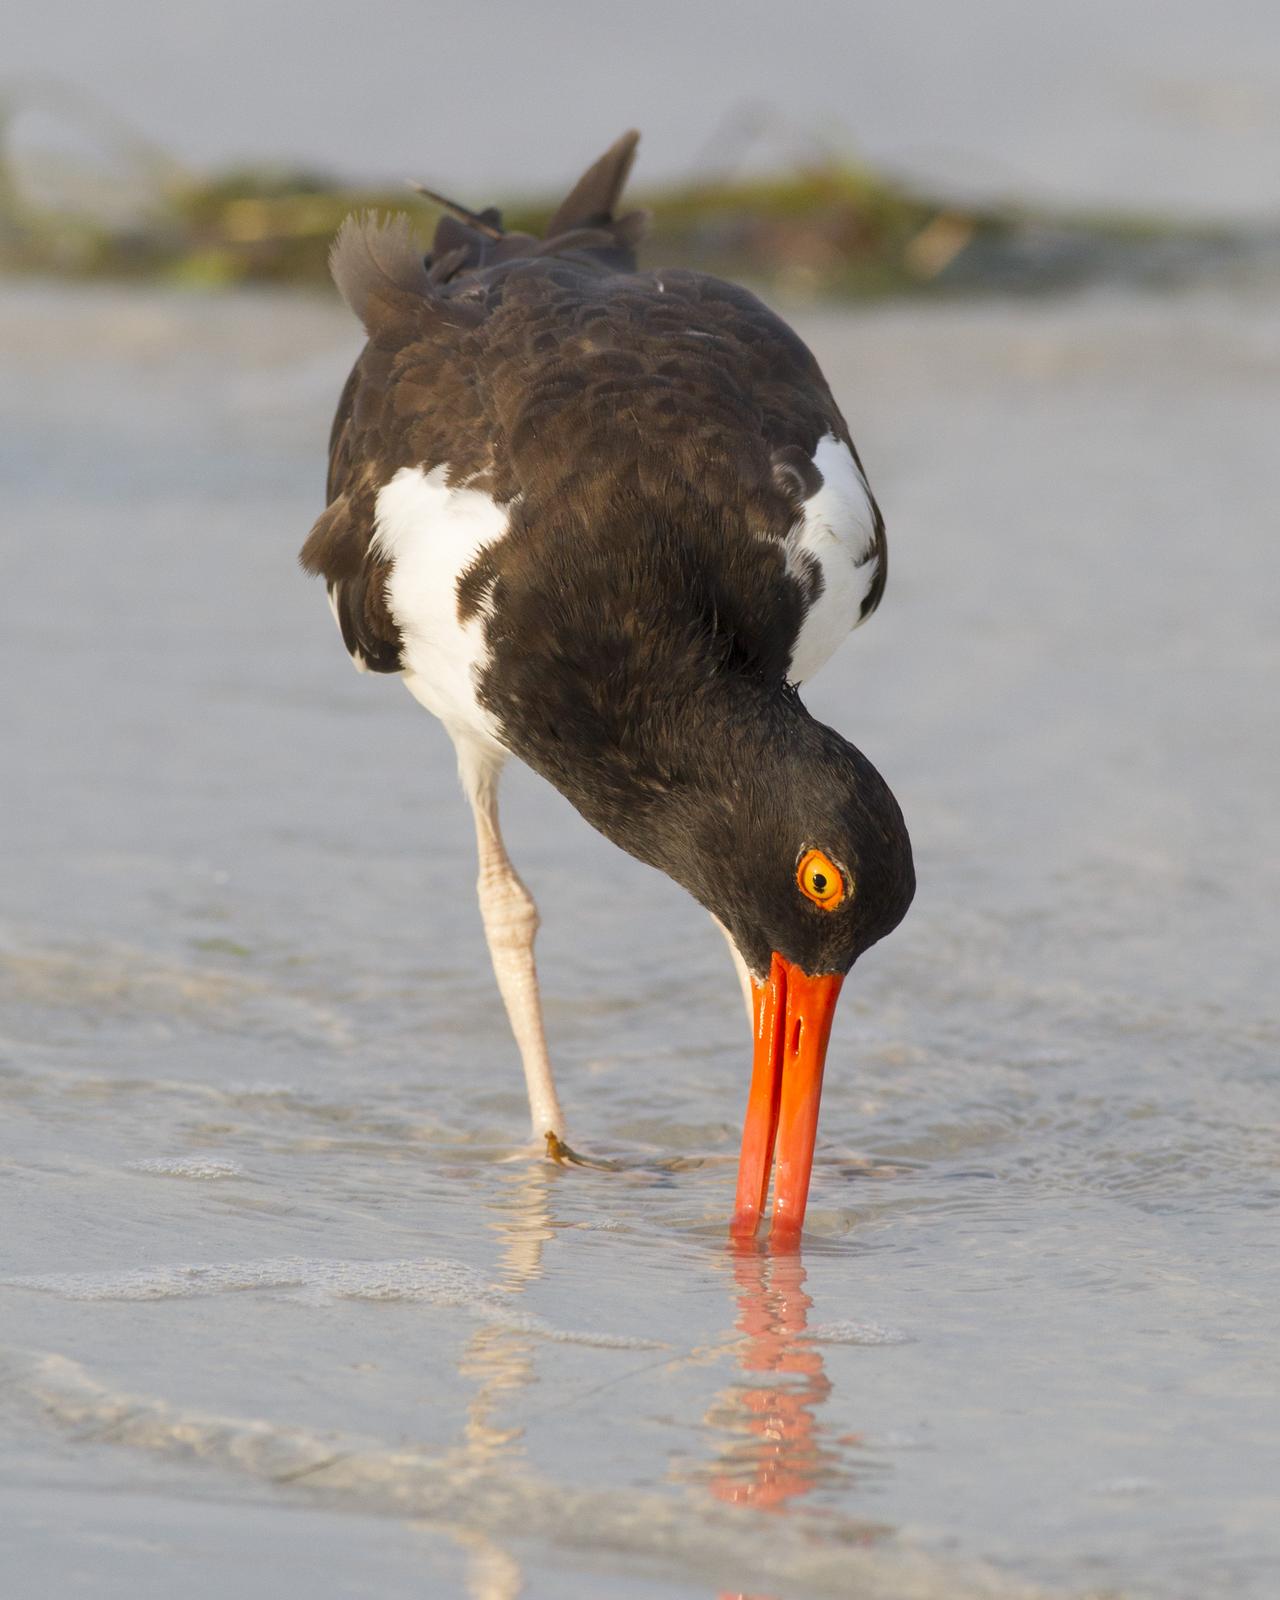 American Oystercatcher Photo by Jeff Moore